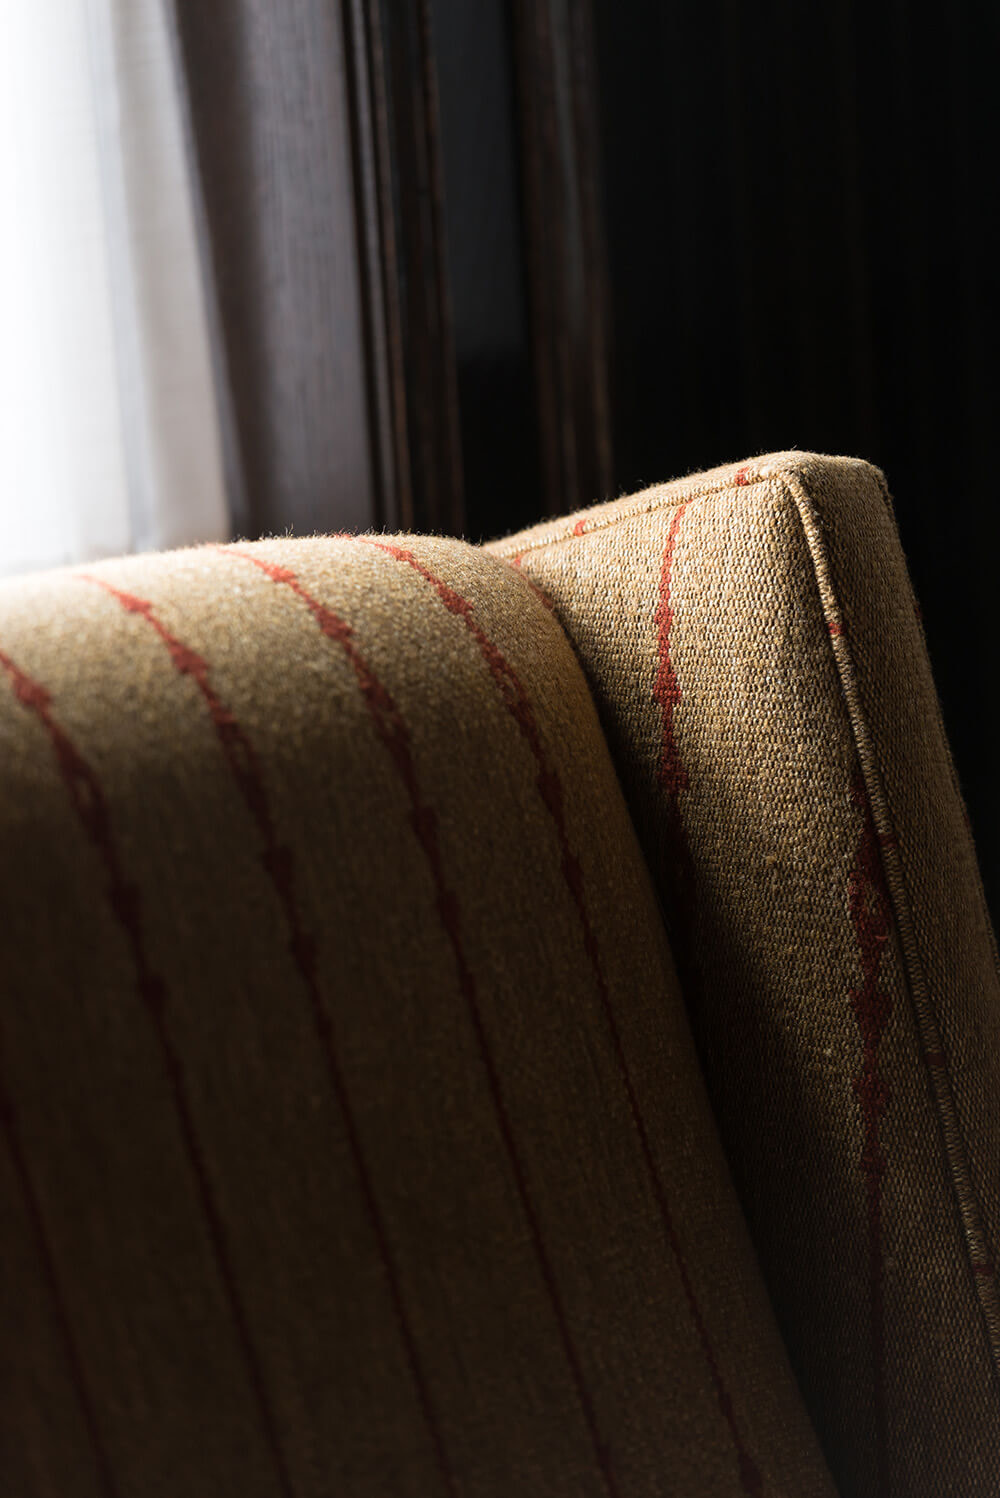 Striped fabric detail on corner of chair.